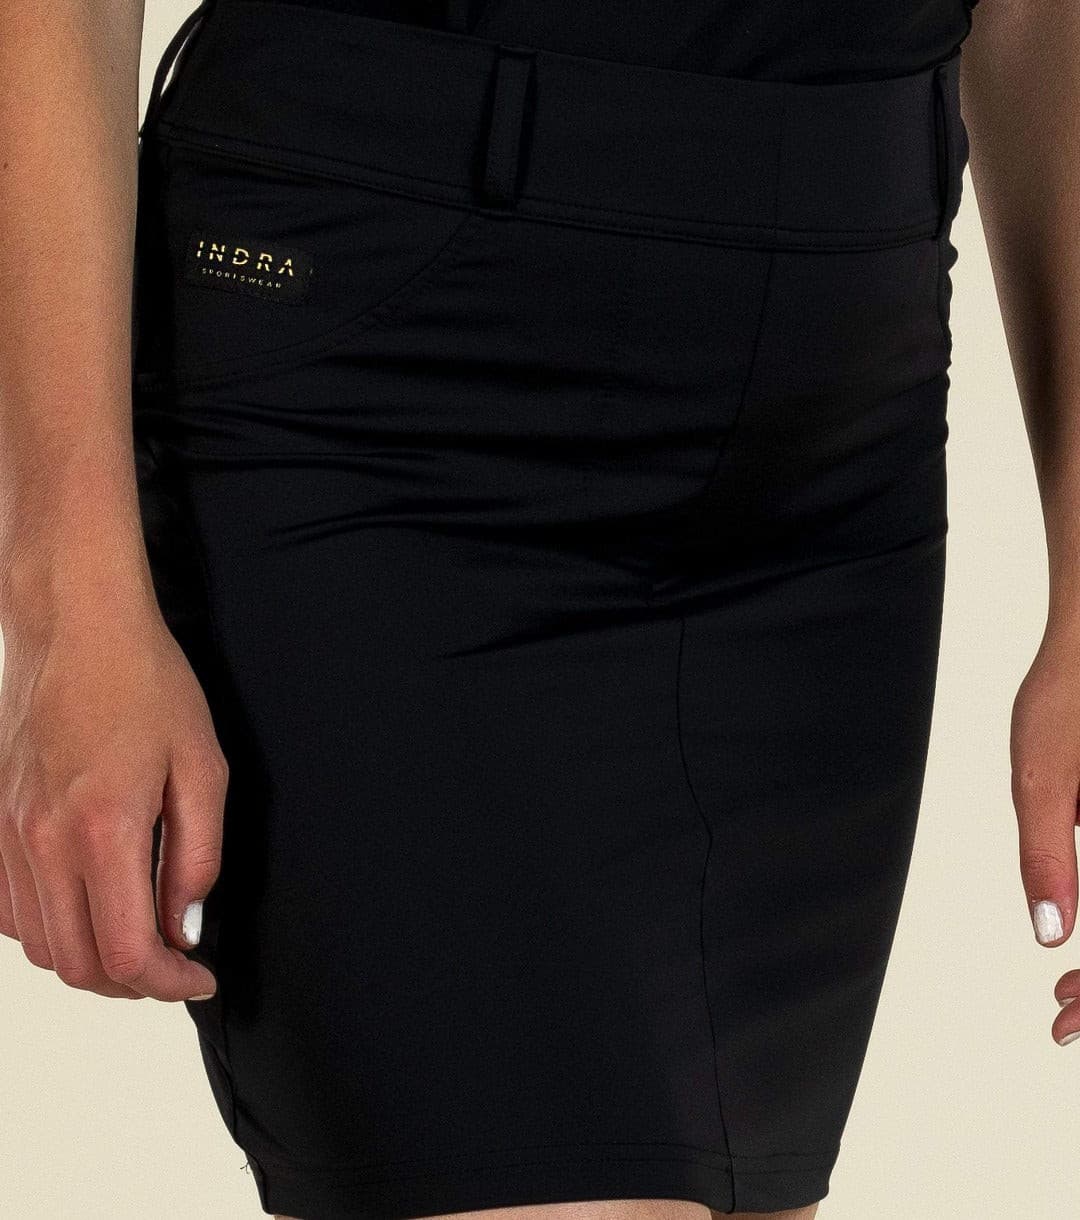 Ladies black sustainable golf skirt made by woman for women's